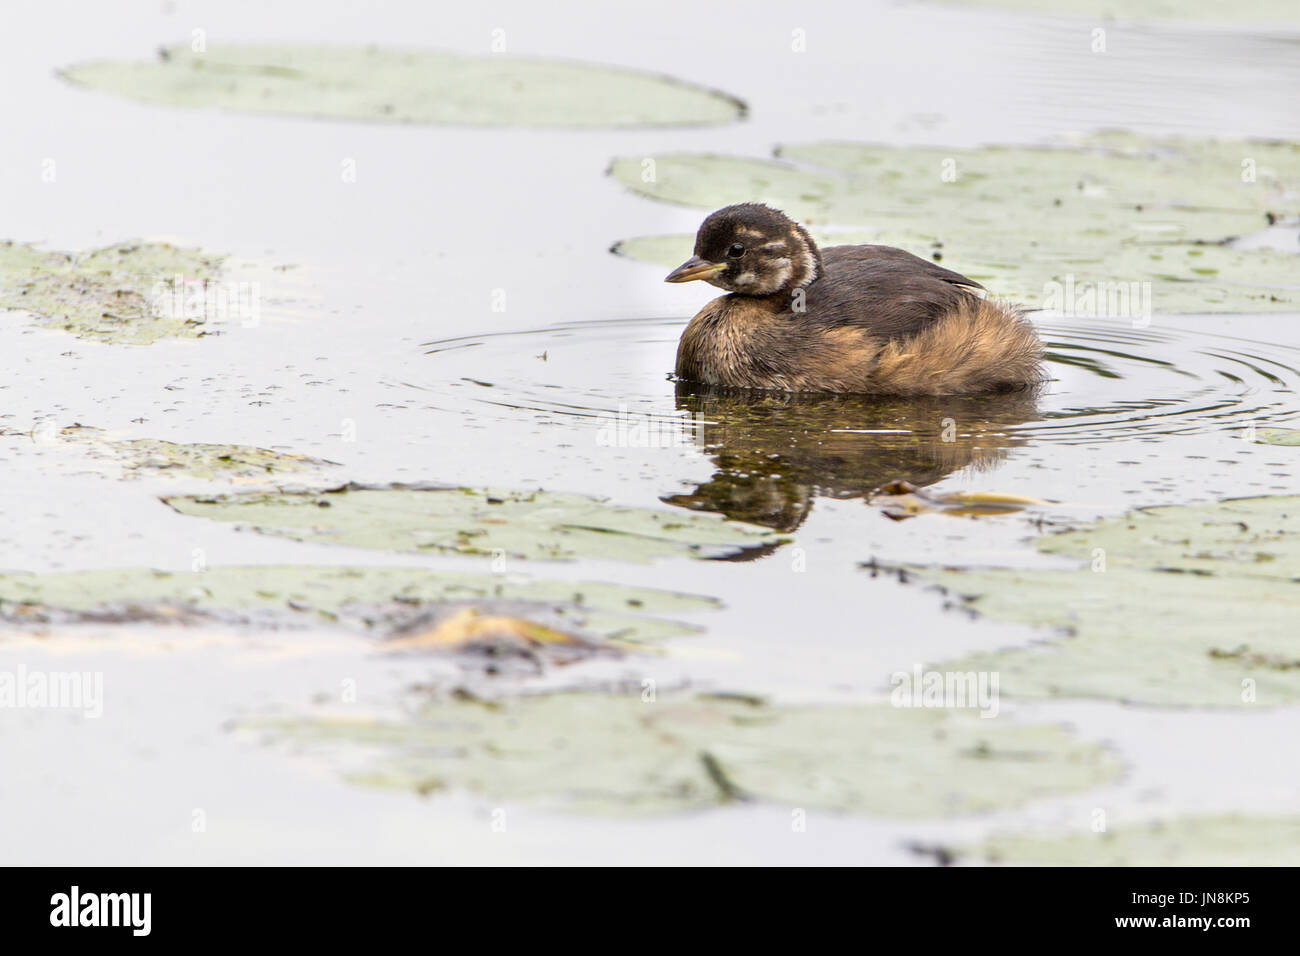 Little grebe or Tachybaptus ruficollis on lake between lilly pads. This looks like a juvenile due to the face markings as black bars behind eyes. Stock Photo